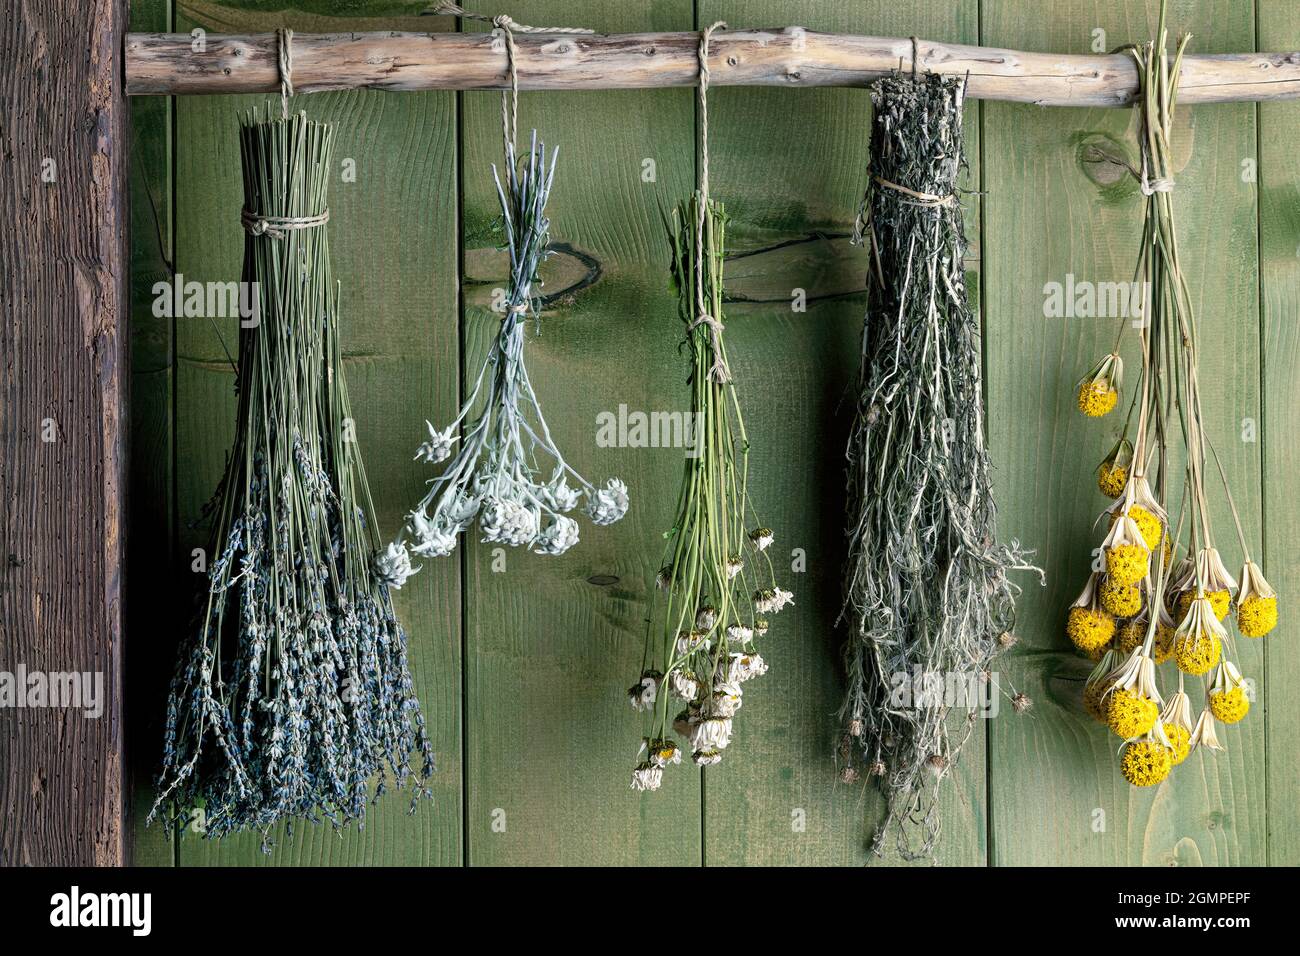 various dried herbs and flowers in front of rustic background Stock Photo